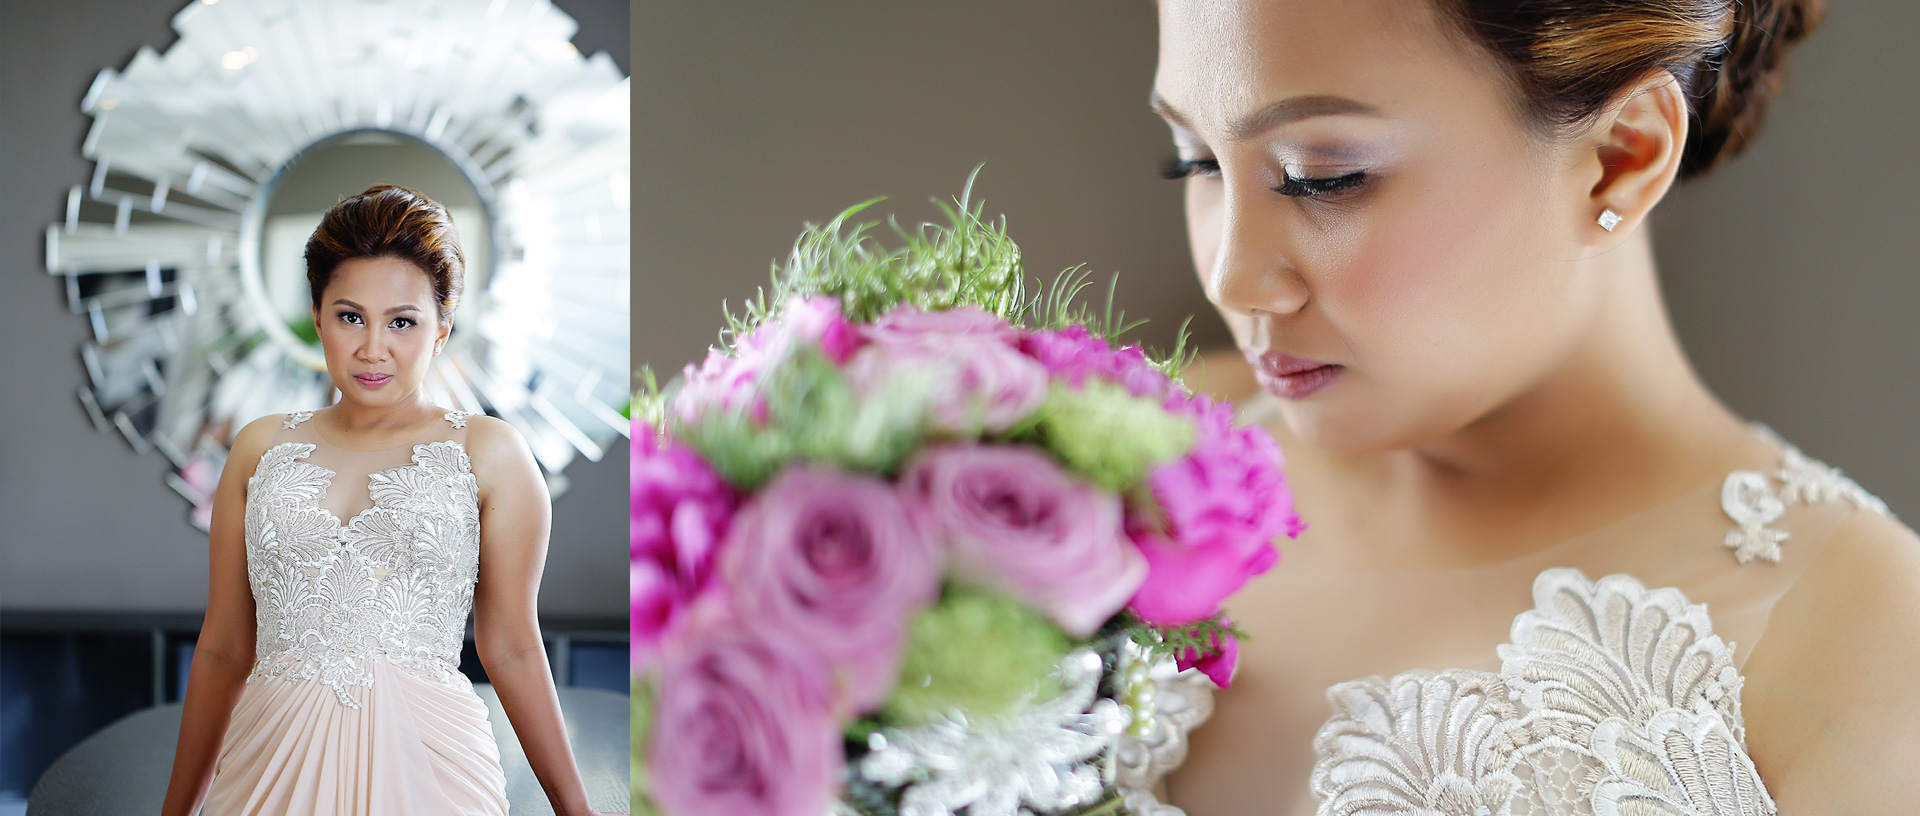 Vibrant Images by Jayson and Joanne Photography